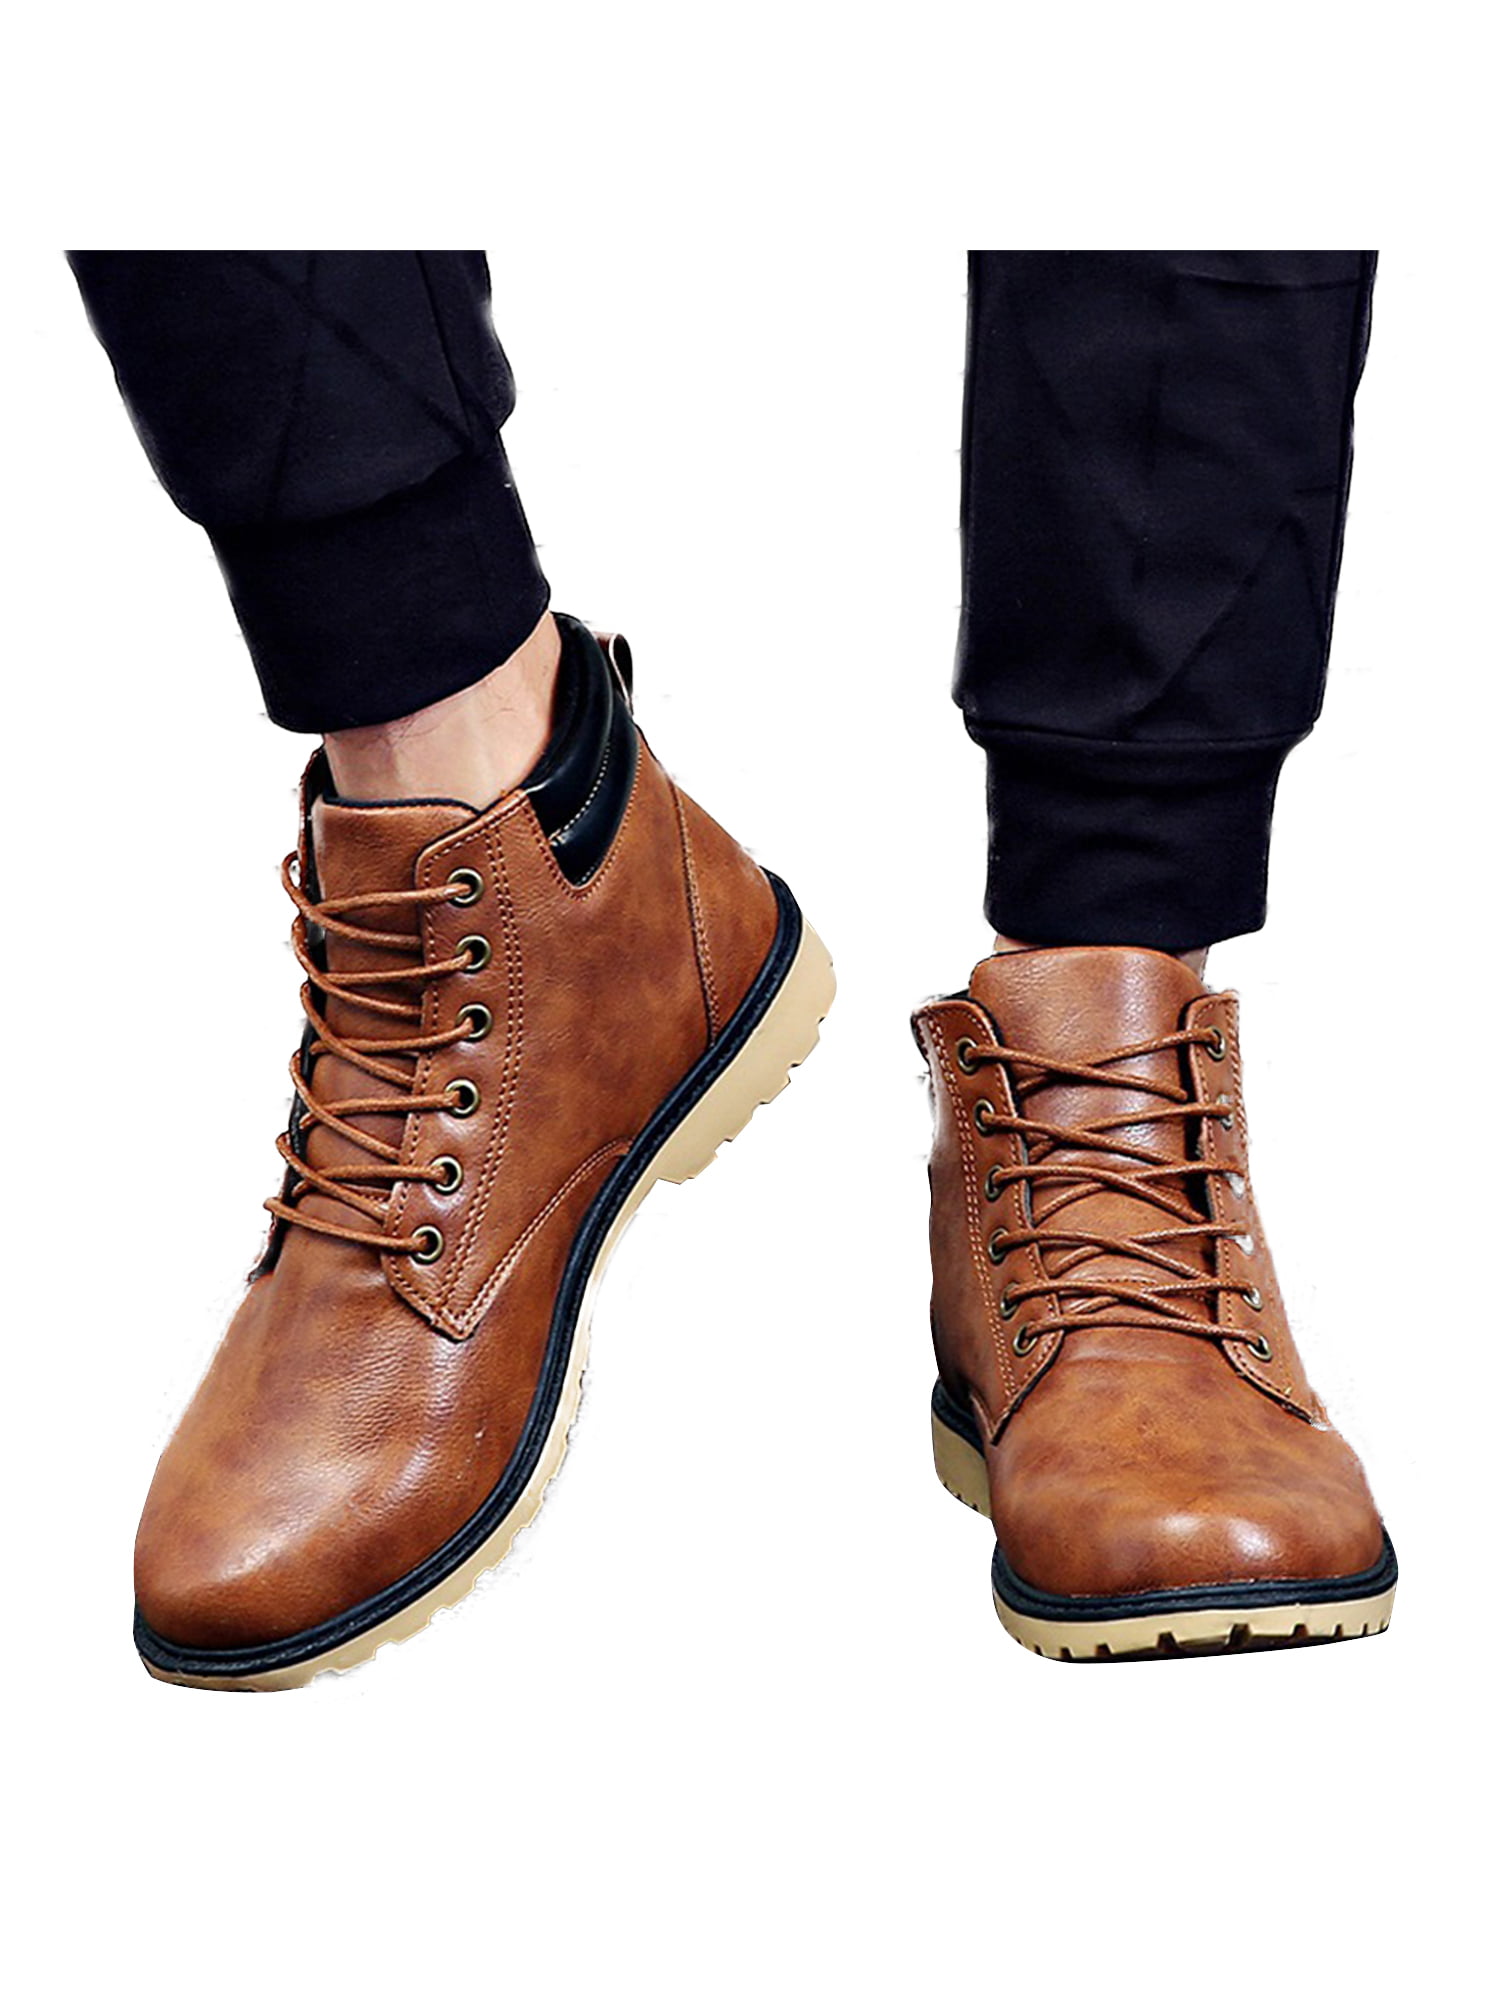 MENS CONTRAST RUBBER SOLE LACE UP WORK SMART CASUAL BIKER ANKLE BOOTS SIZE 